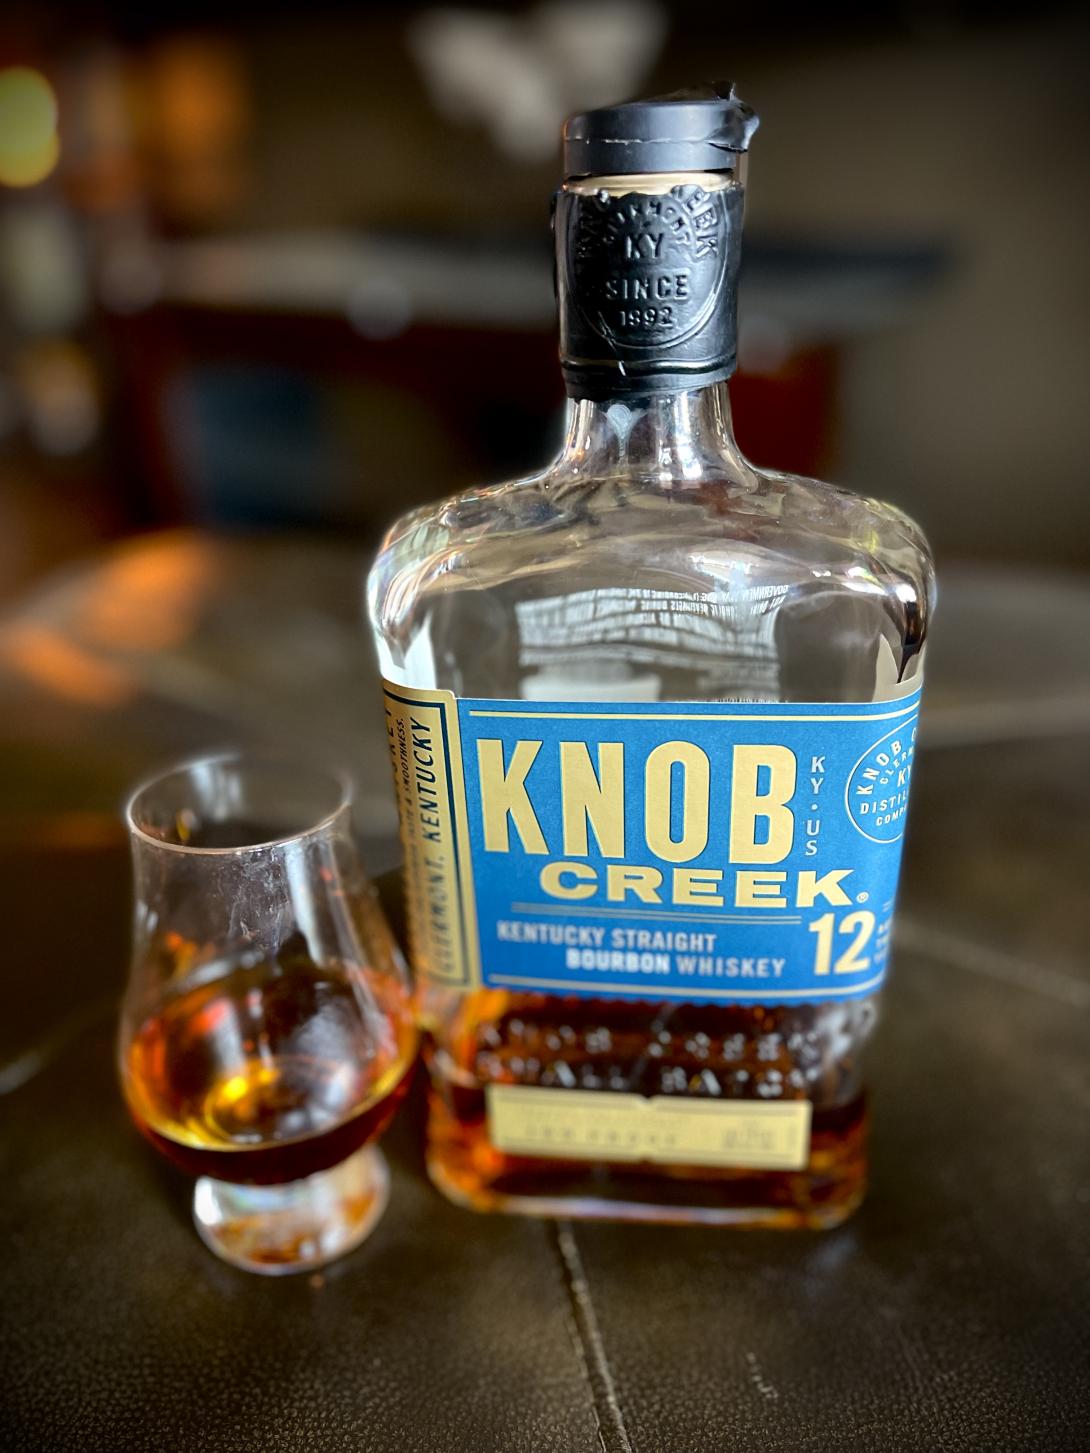 KNOB CREEK 12 YEAR BOURBON WHISKEY and a snifter glass